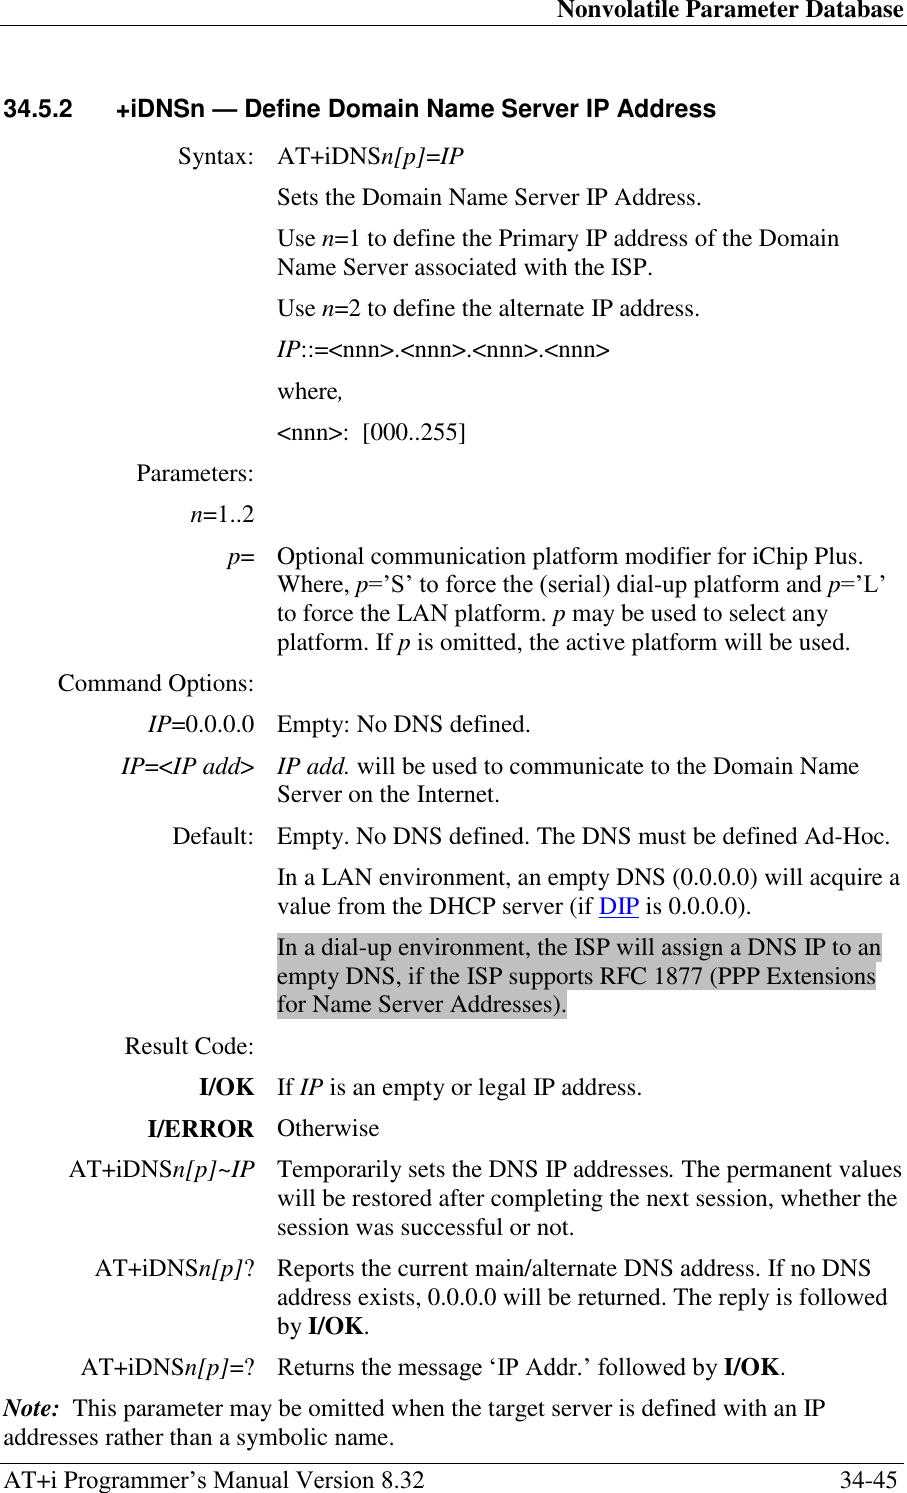 Nonvolatile Parameter Database AT+i Programmer‘s Manual Version 8.32  34-45 34.5.2  +iDNSn — Define Domain Name Server IP Address  Syntax: AT+iDNSn[p]=IP  Sets the Domain Name Server IP Address. Use n=1 to define the Primary IP address of the Domain Name Server associated with the ISP. Use n=2 to define the alternate IP address. IP::=&lt;nnn&gt;.&lt;nnn&gt;.&lt;nnn&gt;.&lt;nnn&gt; where, &lt;nnn&gt;:  [000..255] Parameters:  n=1..2  p= Optional communication platform modifier for iChip Plus. Where, p=‘S‘ to force the (serial) dial-up platform and p=‘L‘ to force the LAN platform. p may be used to select any platform. If p is omitted, the active platform will be used. Command Options:  IP=0.0.0.0 Empty: No DNS defined. IP=&lt;IP add&gt; IP add. will be used to communicate to the Domain Name Server on the Internet. Default: Empty. No DNS defined. The DNS must be defined Ad-Hoc. In a LAN environment, an empty DNS (0.0.0.0) will acquire a value from the DHCP server (if DIP is 0.0.0.0). In a dial-up environment, the ISP will assign a DNS IP to an empty DNS, if the ISP supports RFC 1877 (PPP Extensions for Name Server Addresses). Result Code:  I/OK If IP is an empty or legal IP address. I/ERROR Otherwise AT+iDNSn[p]~IP Temporarily sets the DNS IP addresses. The permanent values will be restored after completing the next session, whether the session was successful or not. AT+iDNSn[p]? Reports the current main/alternate DNS address. If no DNS address exists, 0.0.0.0 will be returned. The reply is followed by I/OK. AT+iDNSn[p]=? Returns the message ‗IP Addr.‘ followed by I/OK. Note:  This parameter may be omitted when the target server is defined with an IP addresses rather than a symbolic name. 